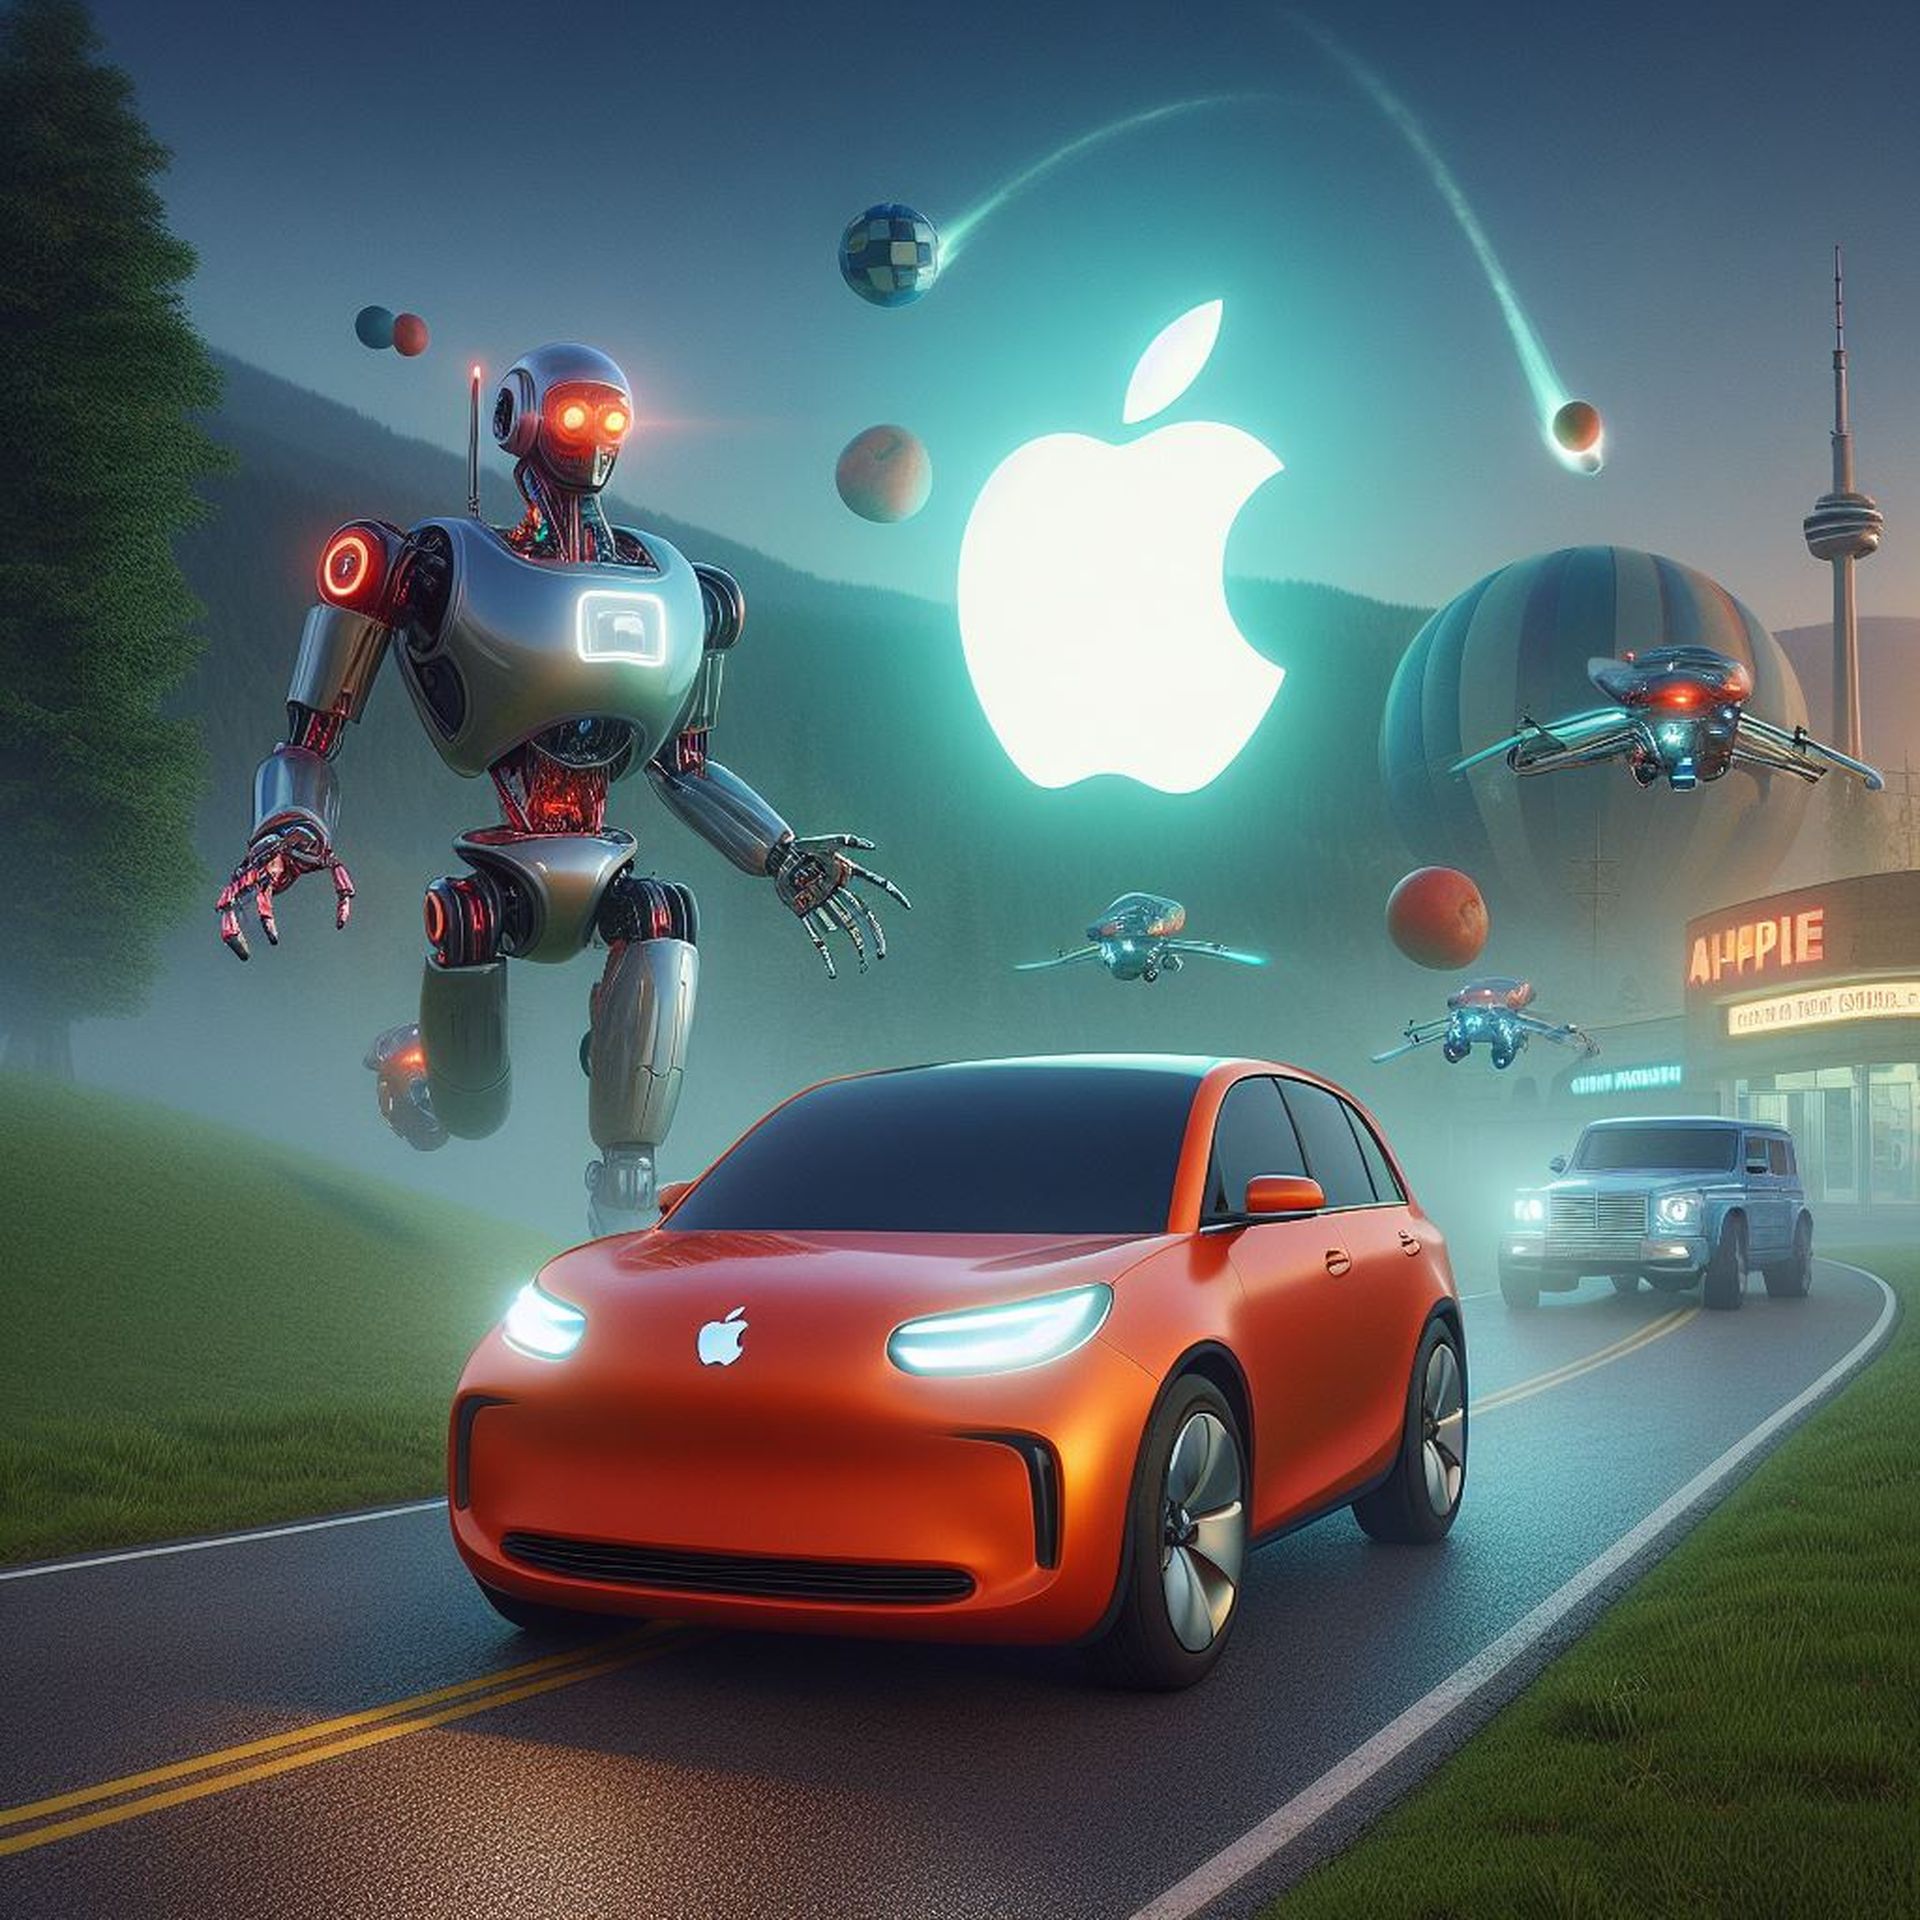 Apple's car dreams turning into robots that will follow you everywhere